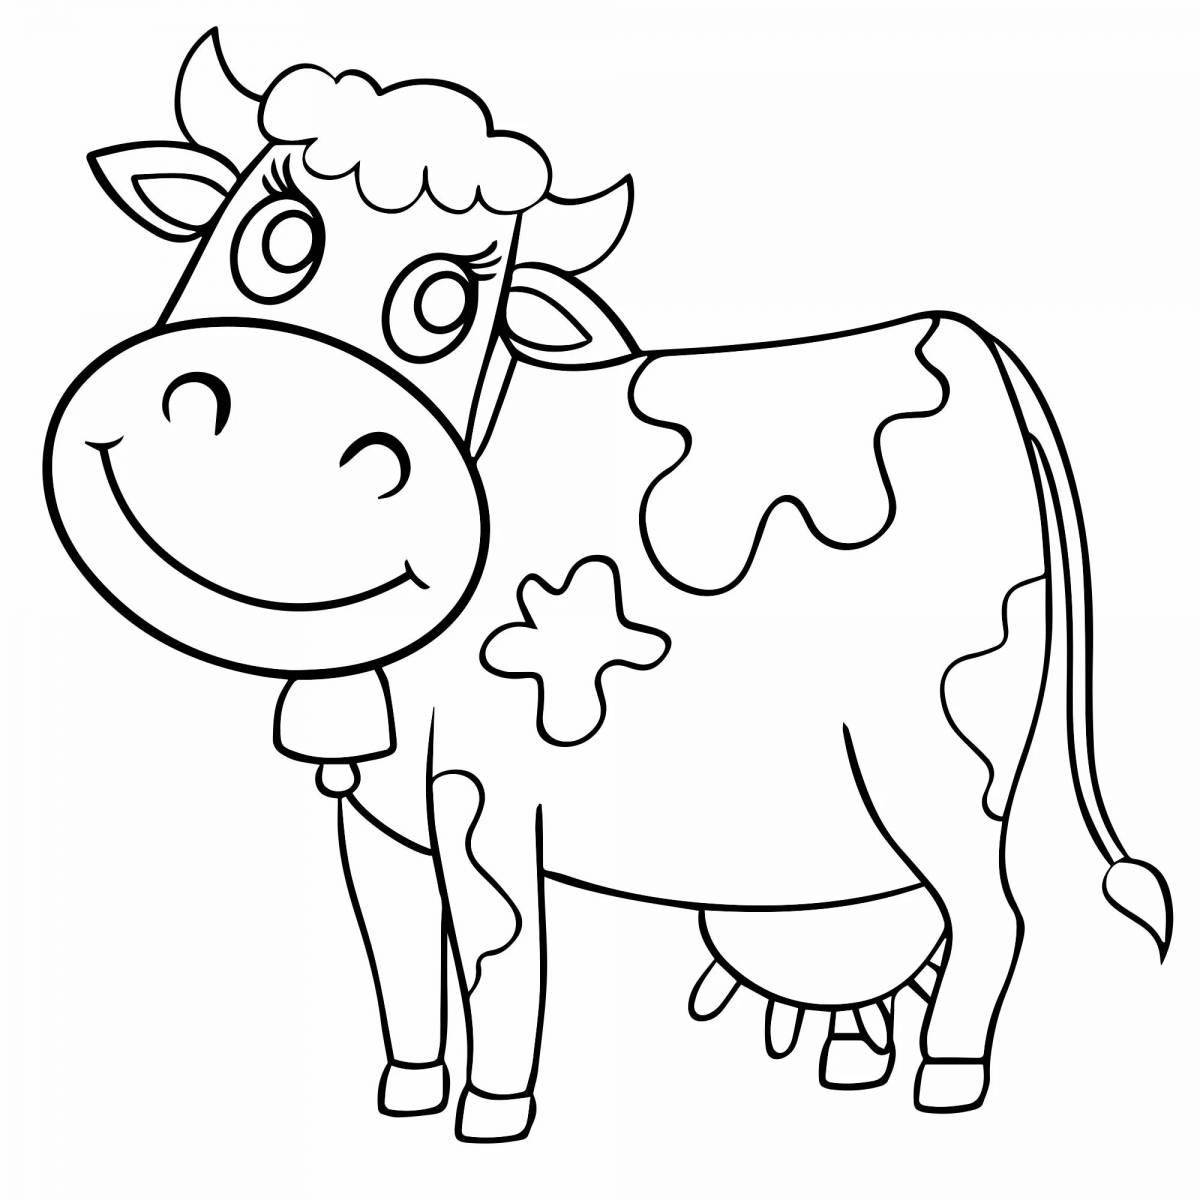 Amazing cow coloring book for 4-5 year olds